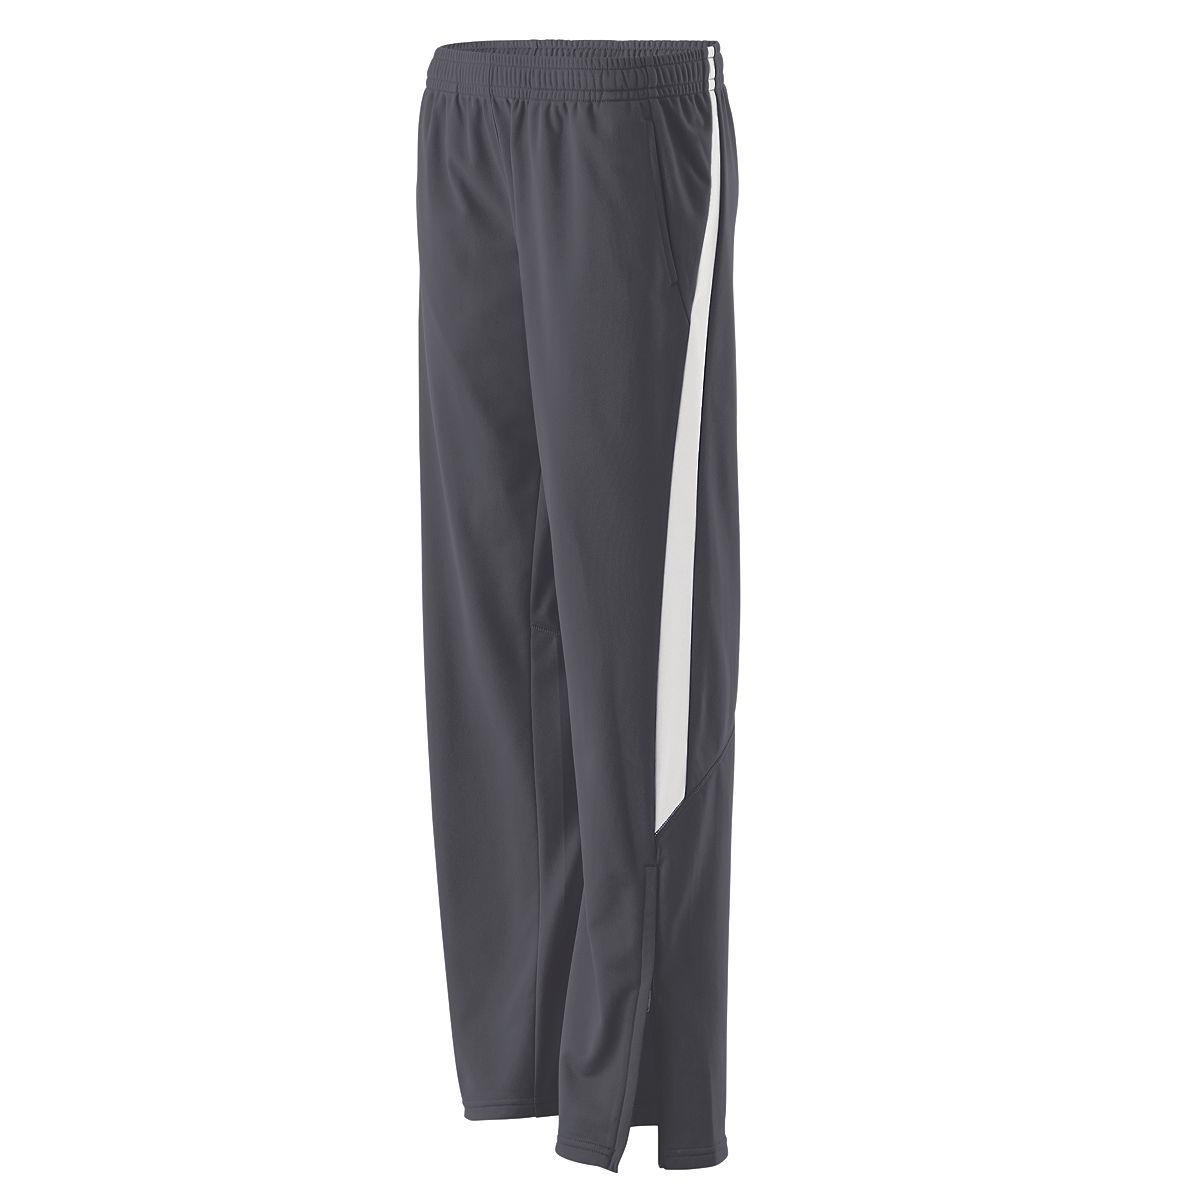 Holloway Ladies Determination Pant in Graphite/White  -Part of the Ladies, Ladies-Pants, Pants, Holloway product lines at KanaleyCreations.com